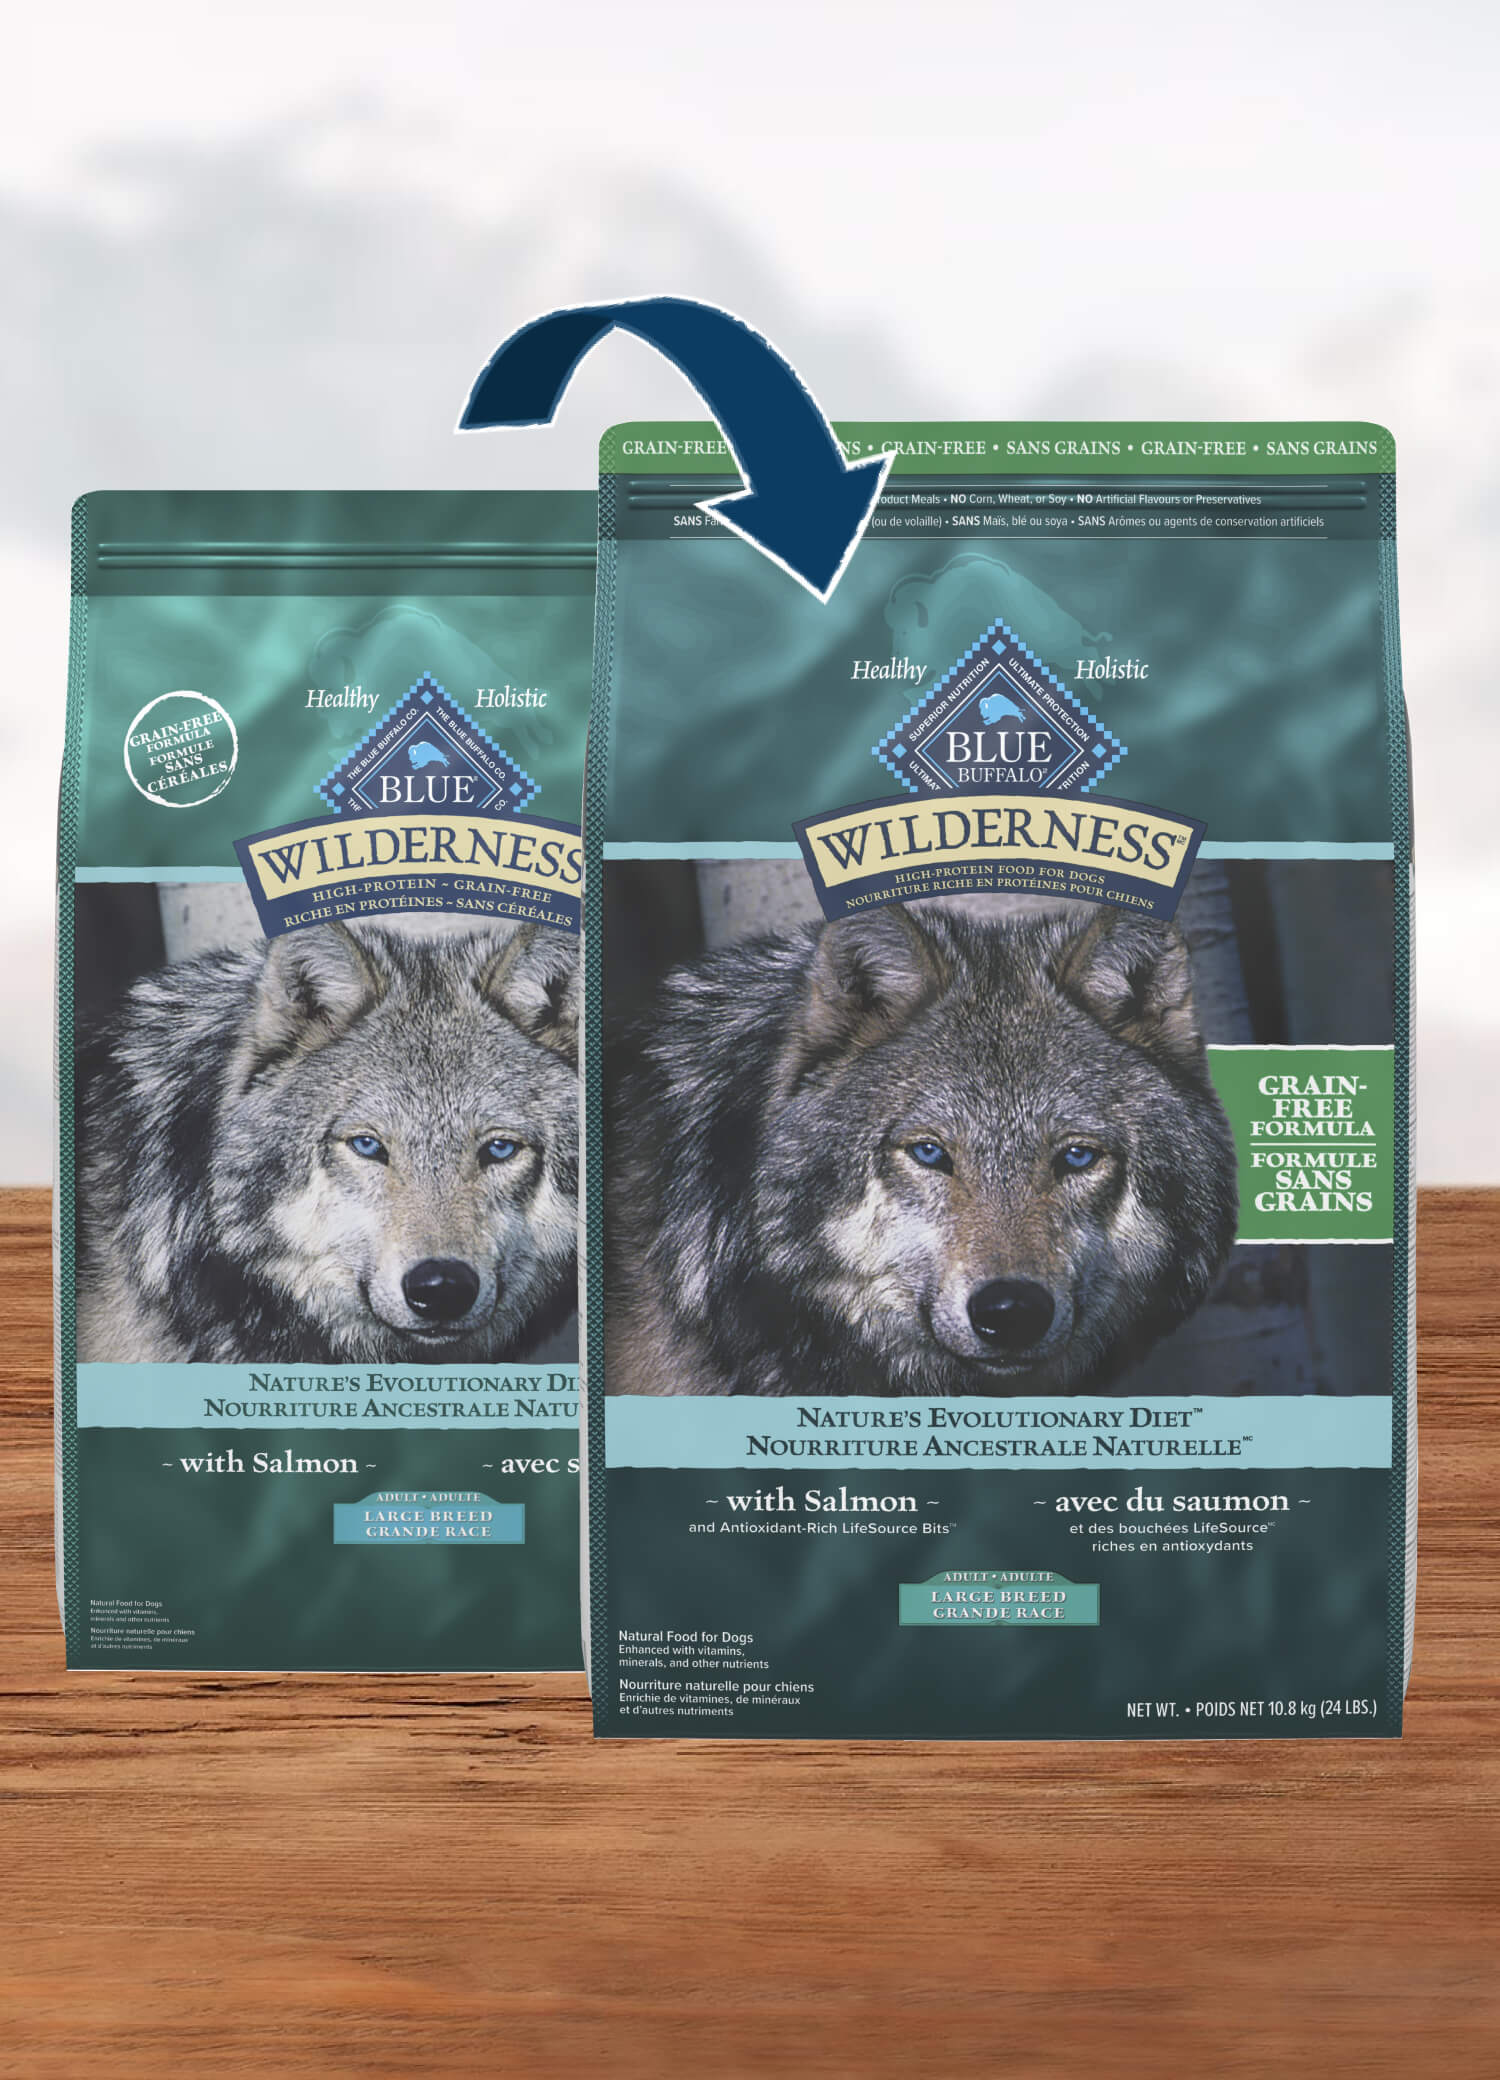 Displaying Two bags of Blue Buffalo Wilderness dog food with an image of a wolf, highlighting the grain-free formula with salmon for large breed dogs and the packaging transition.